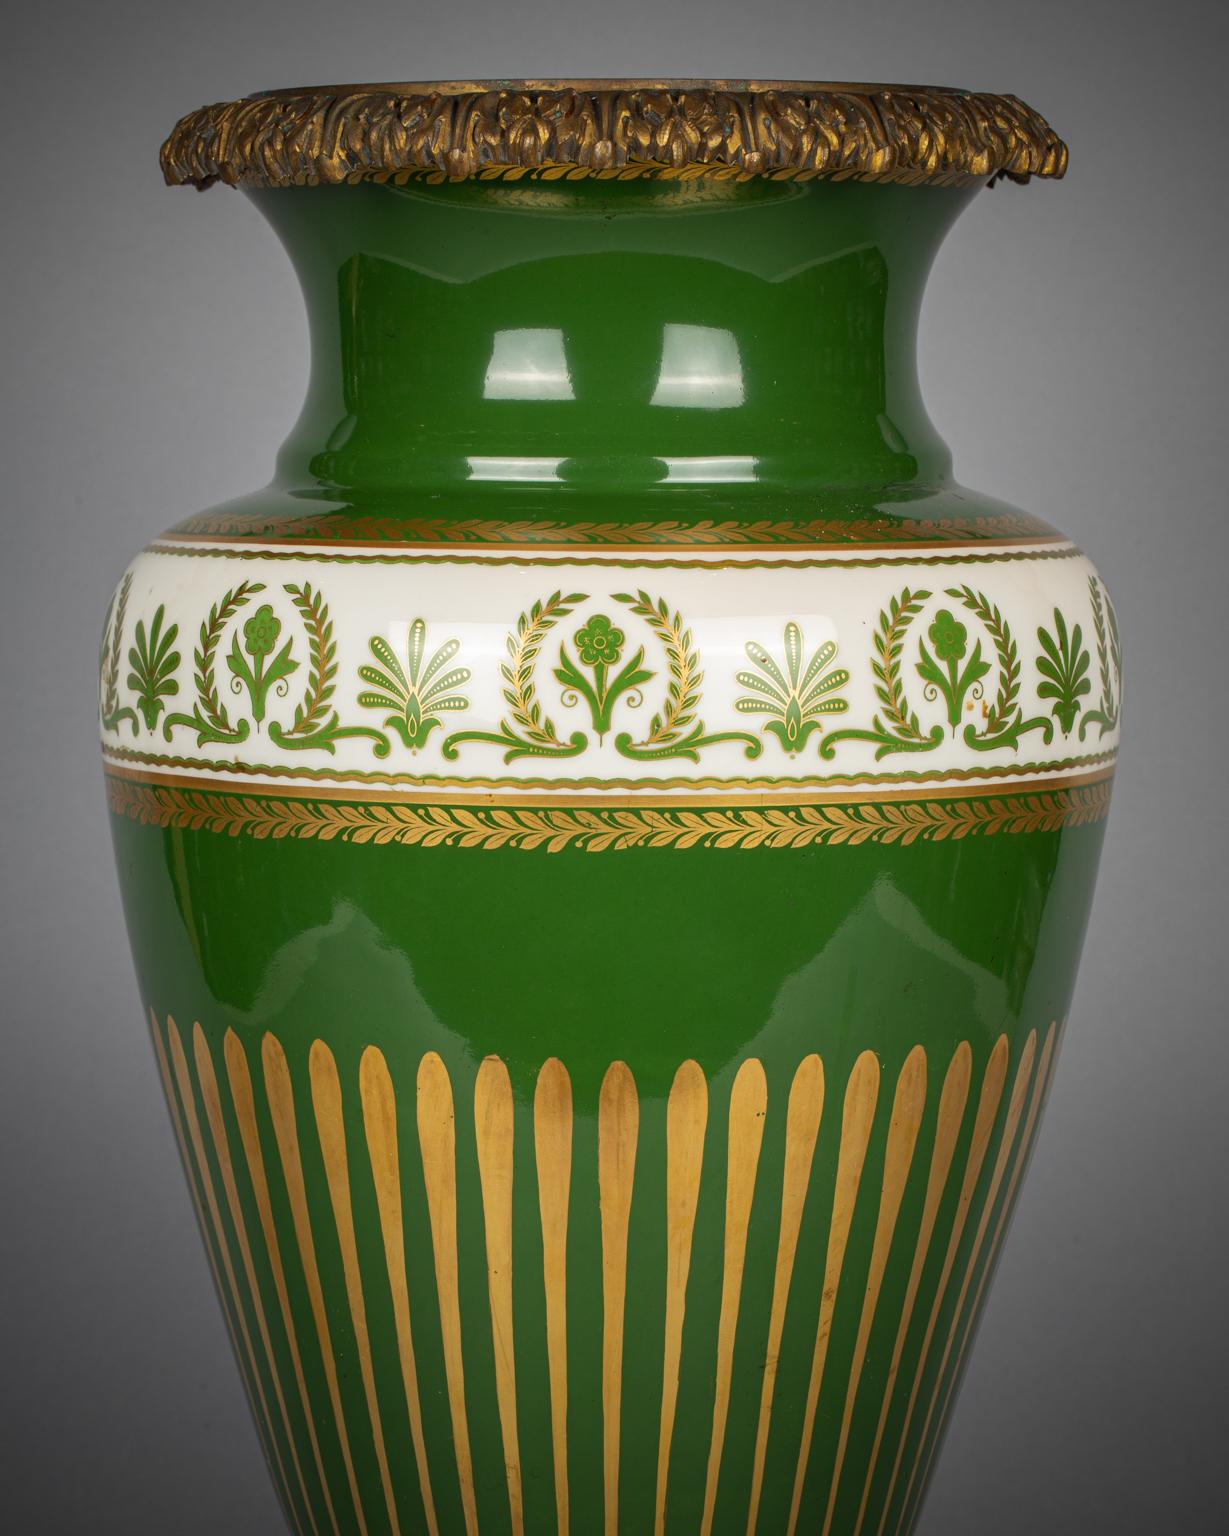 Beautifully hand painted green white design with lovely gilt accents. Ornate bronze mounts at top of the vase as well as the base. Limoges Depose France mark at bottom.